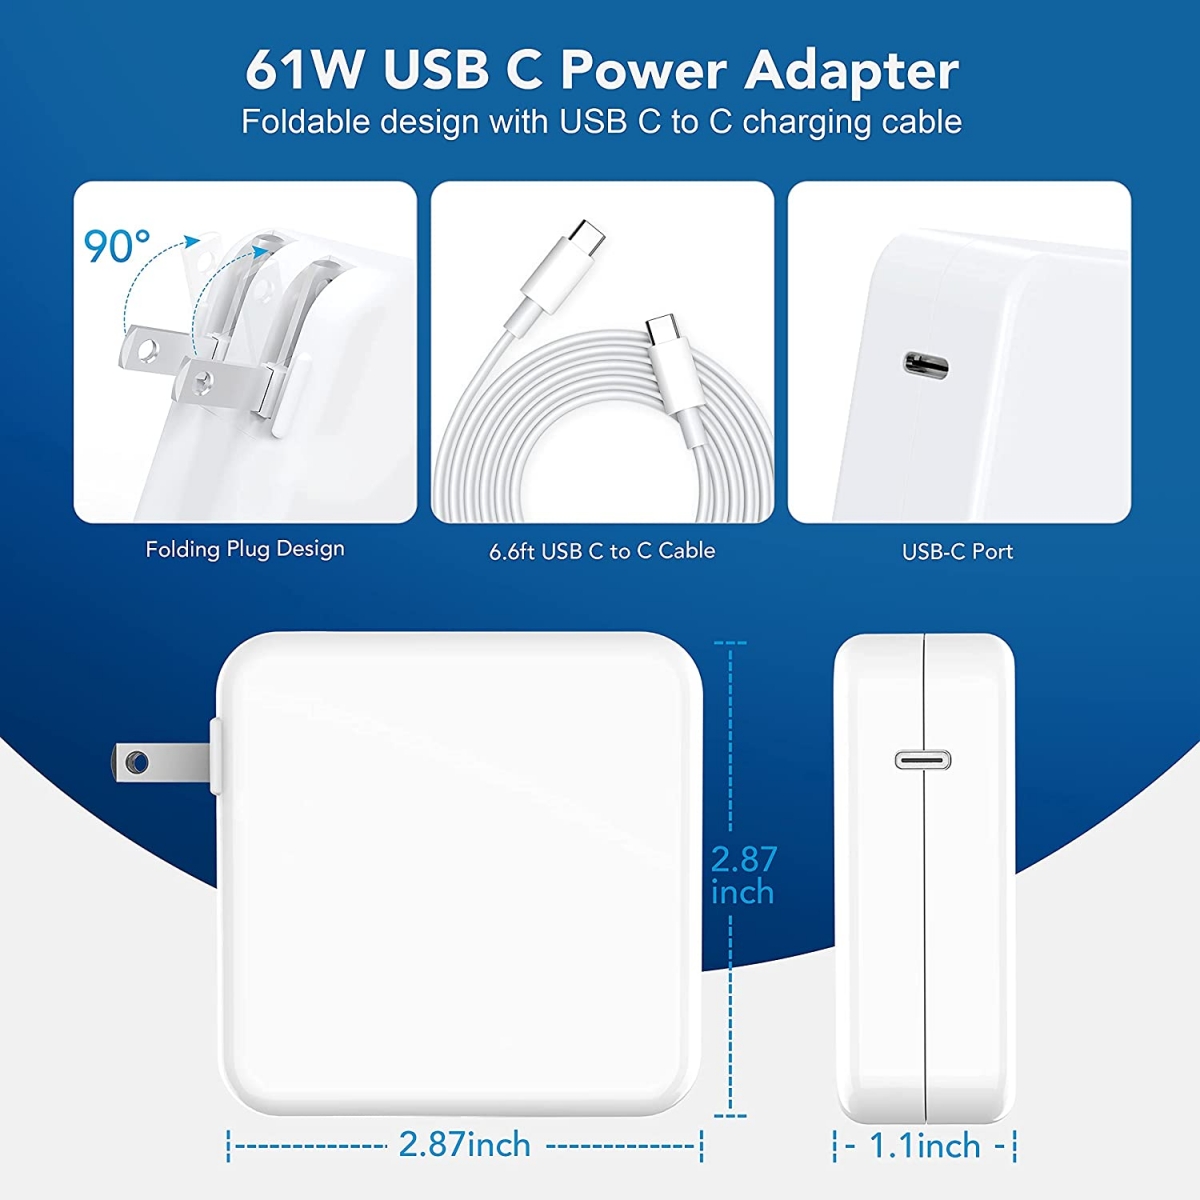 61W USB C Charger Power Adapter-CPY, batterie pour ordinateur portable, adaptateur pour ordinateur portable, chargeur pour ordinateur portable, batterie Dell, batterie Apple, batterie HP